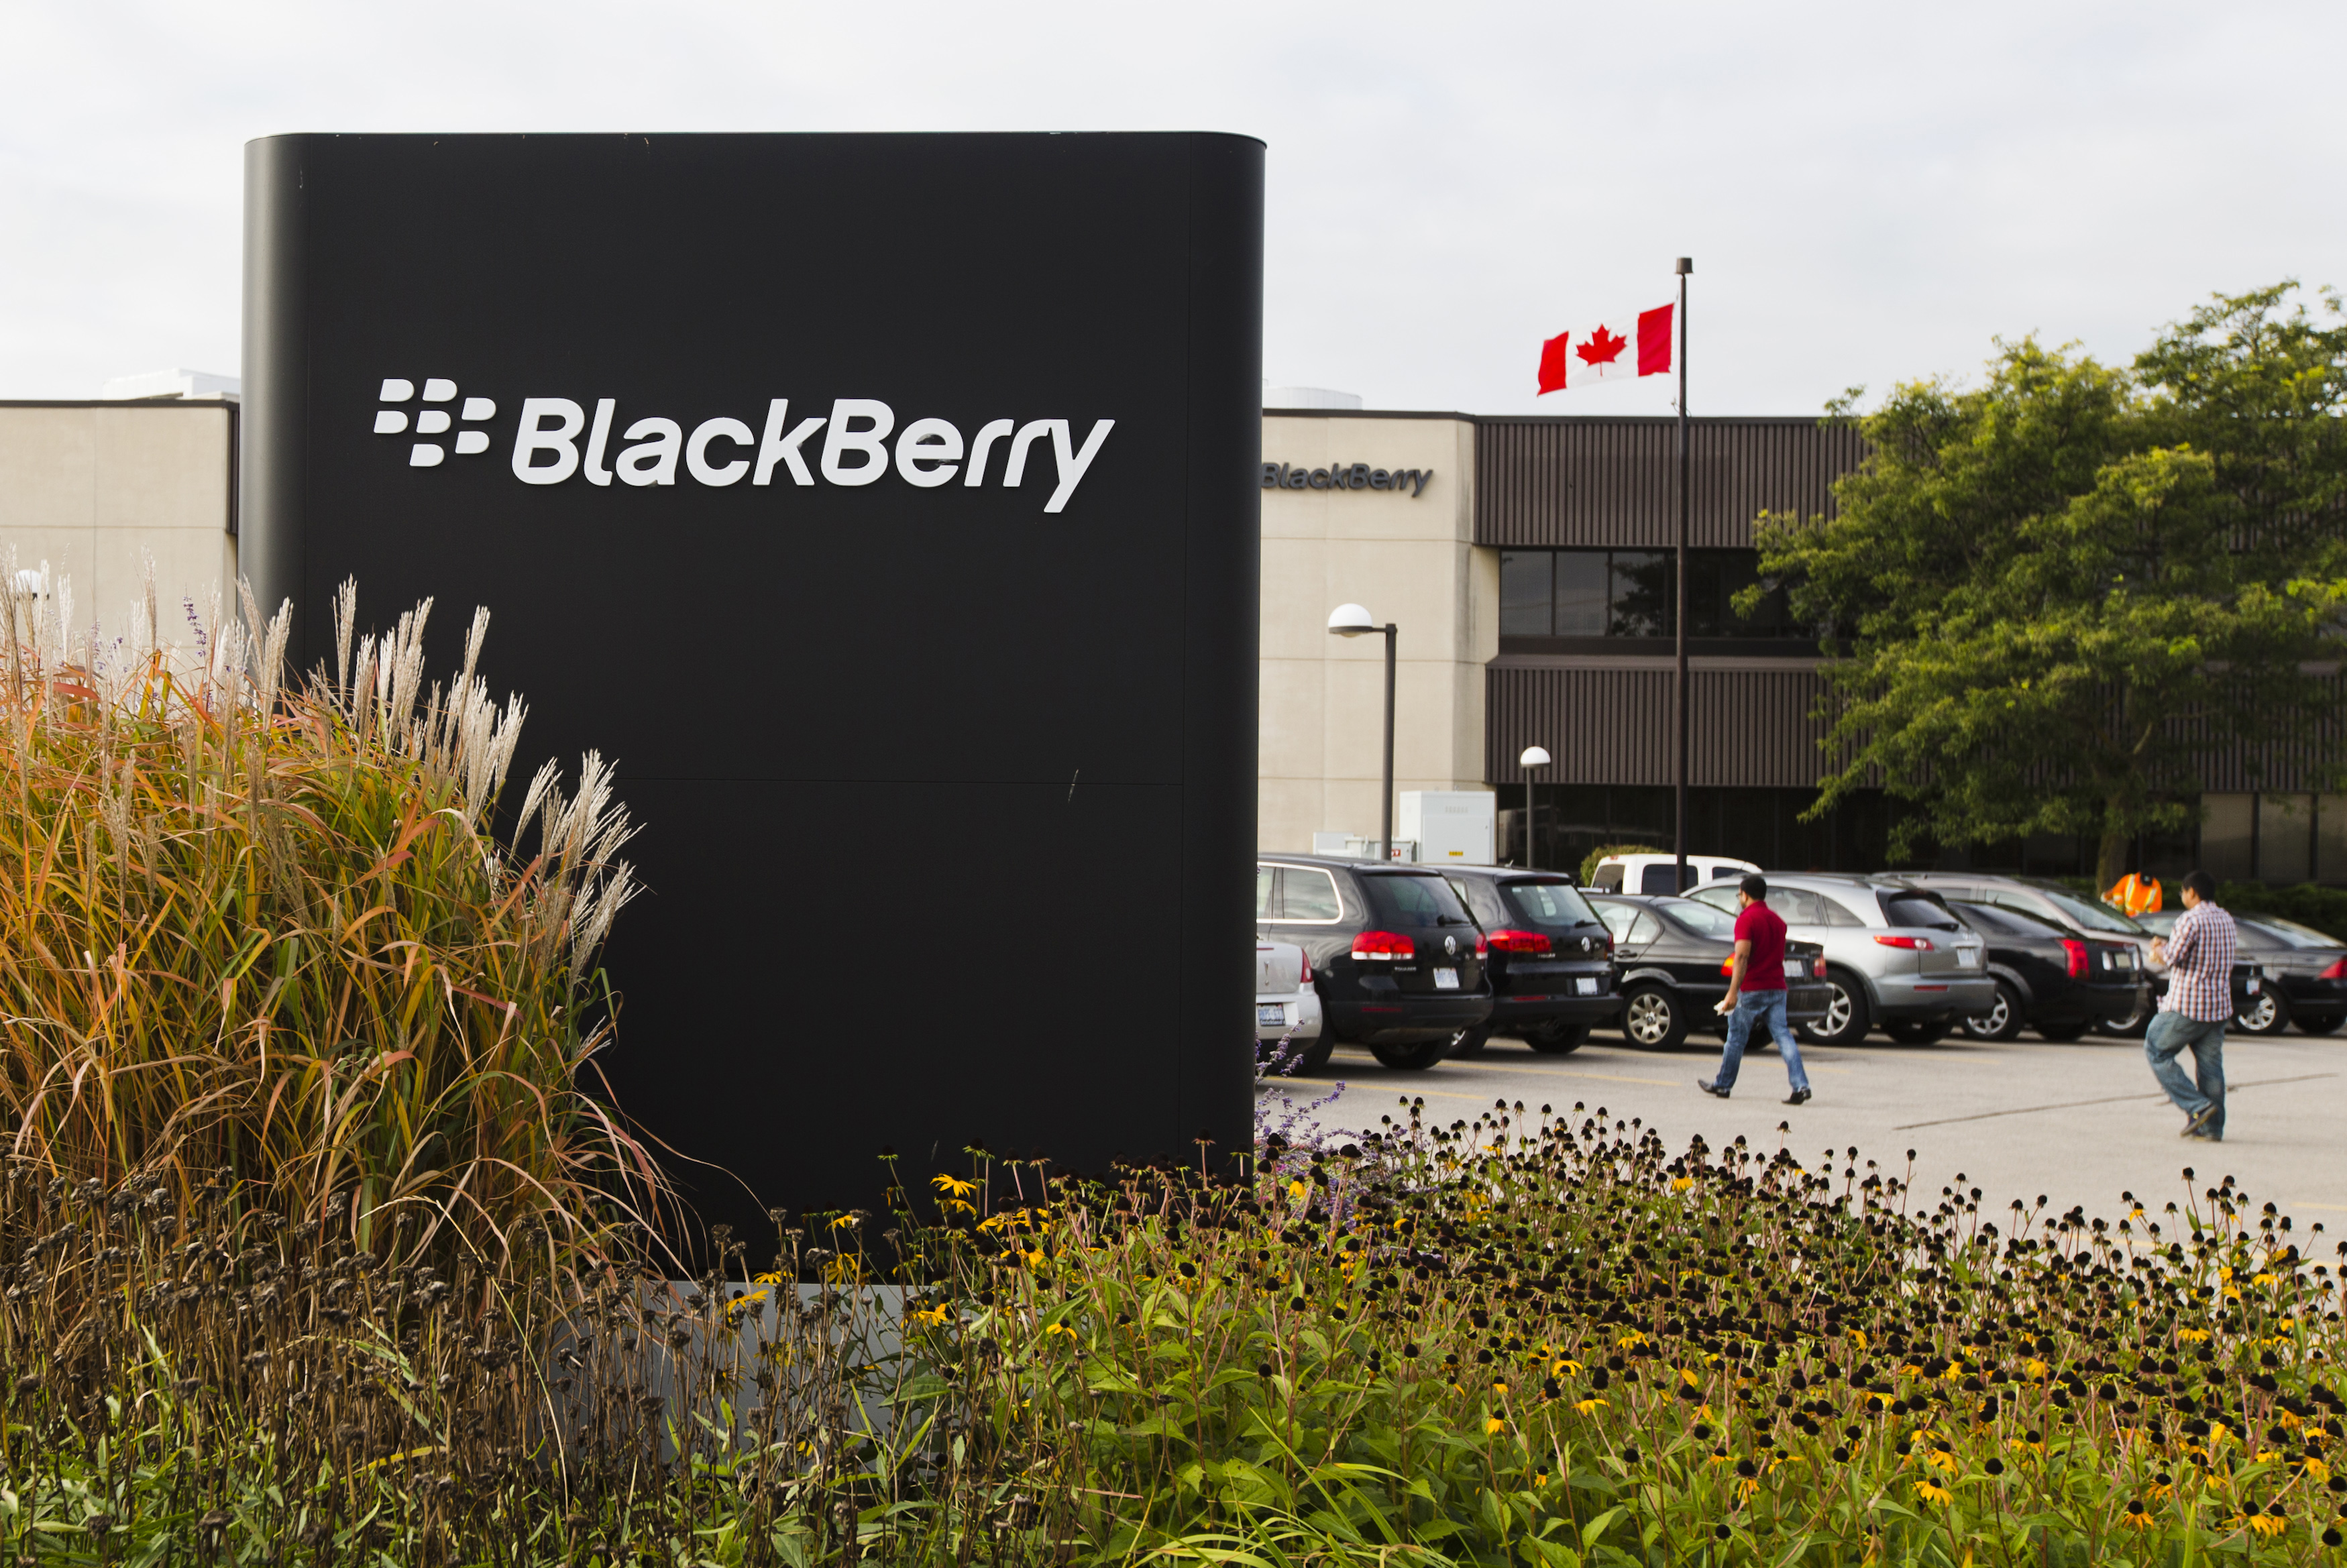 BlackBerry hardware division shutdown was expected. In fact, it is odd that company made it this far even though they hardly had any sales recently!